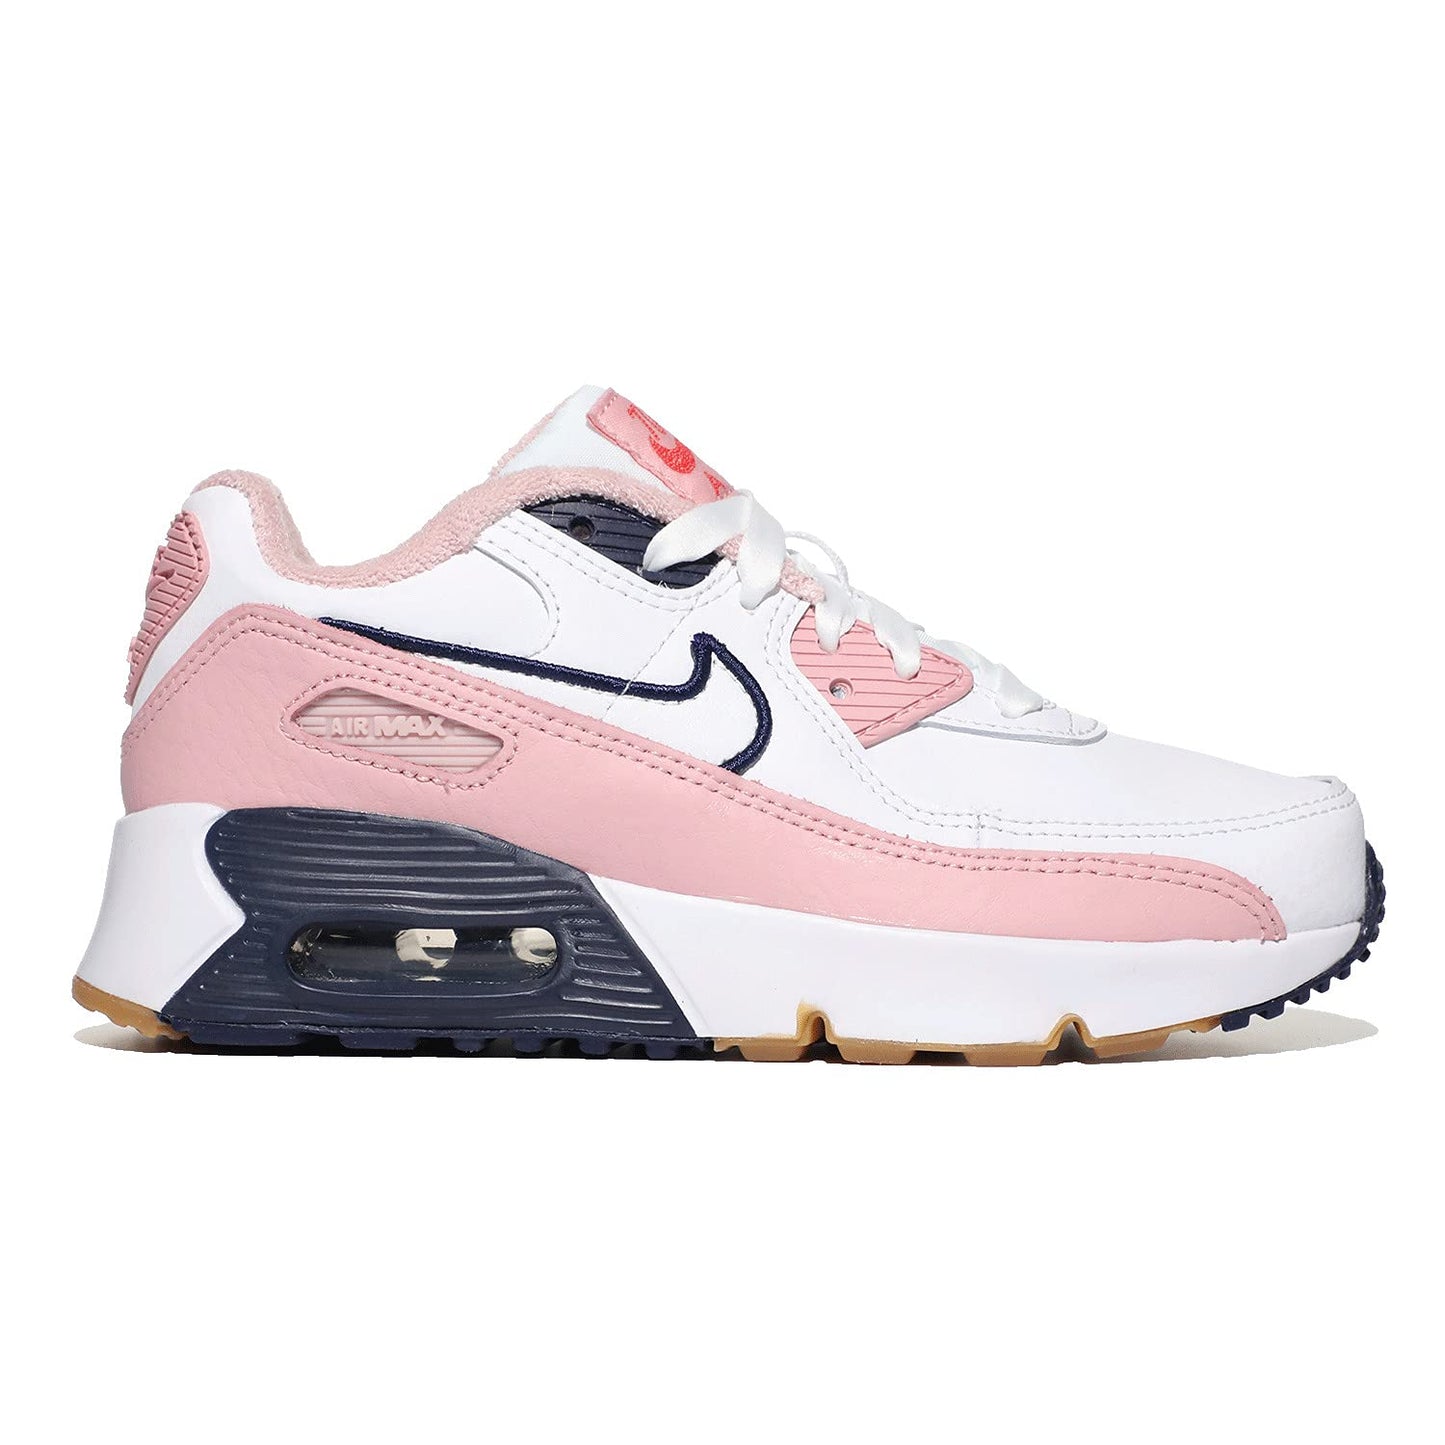 Image 5 of Air Max 90 LTR SE (Little Kid)